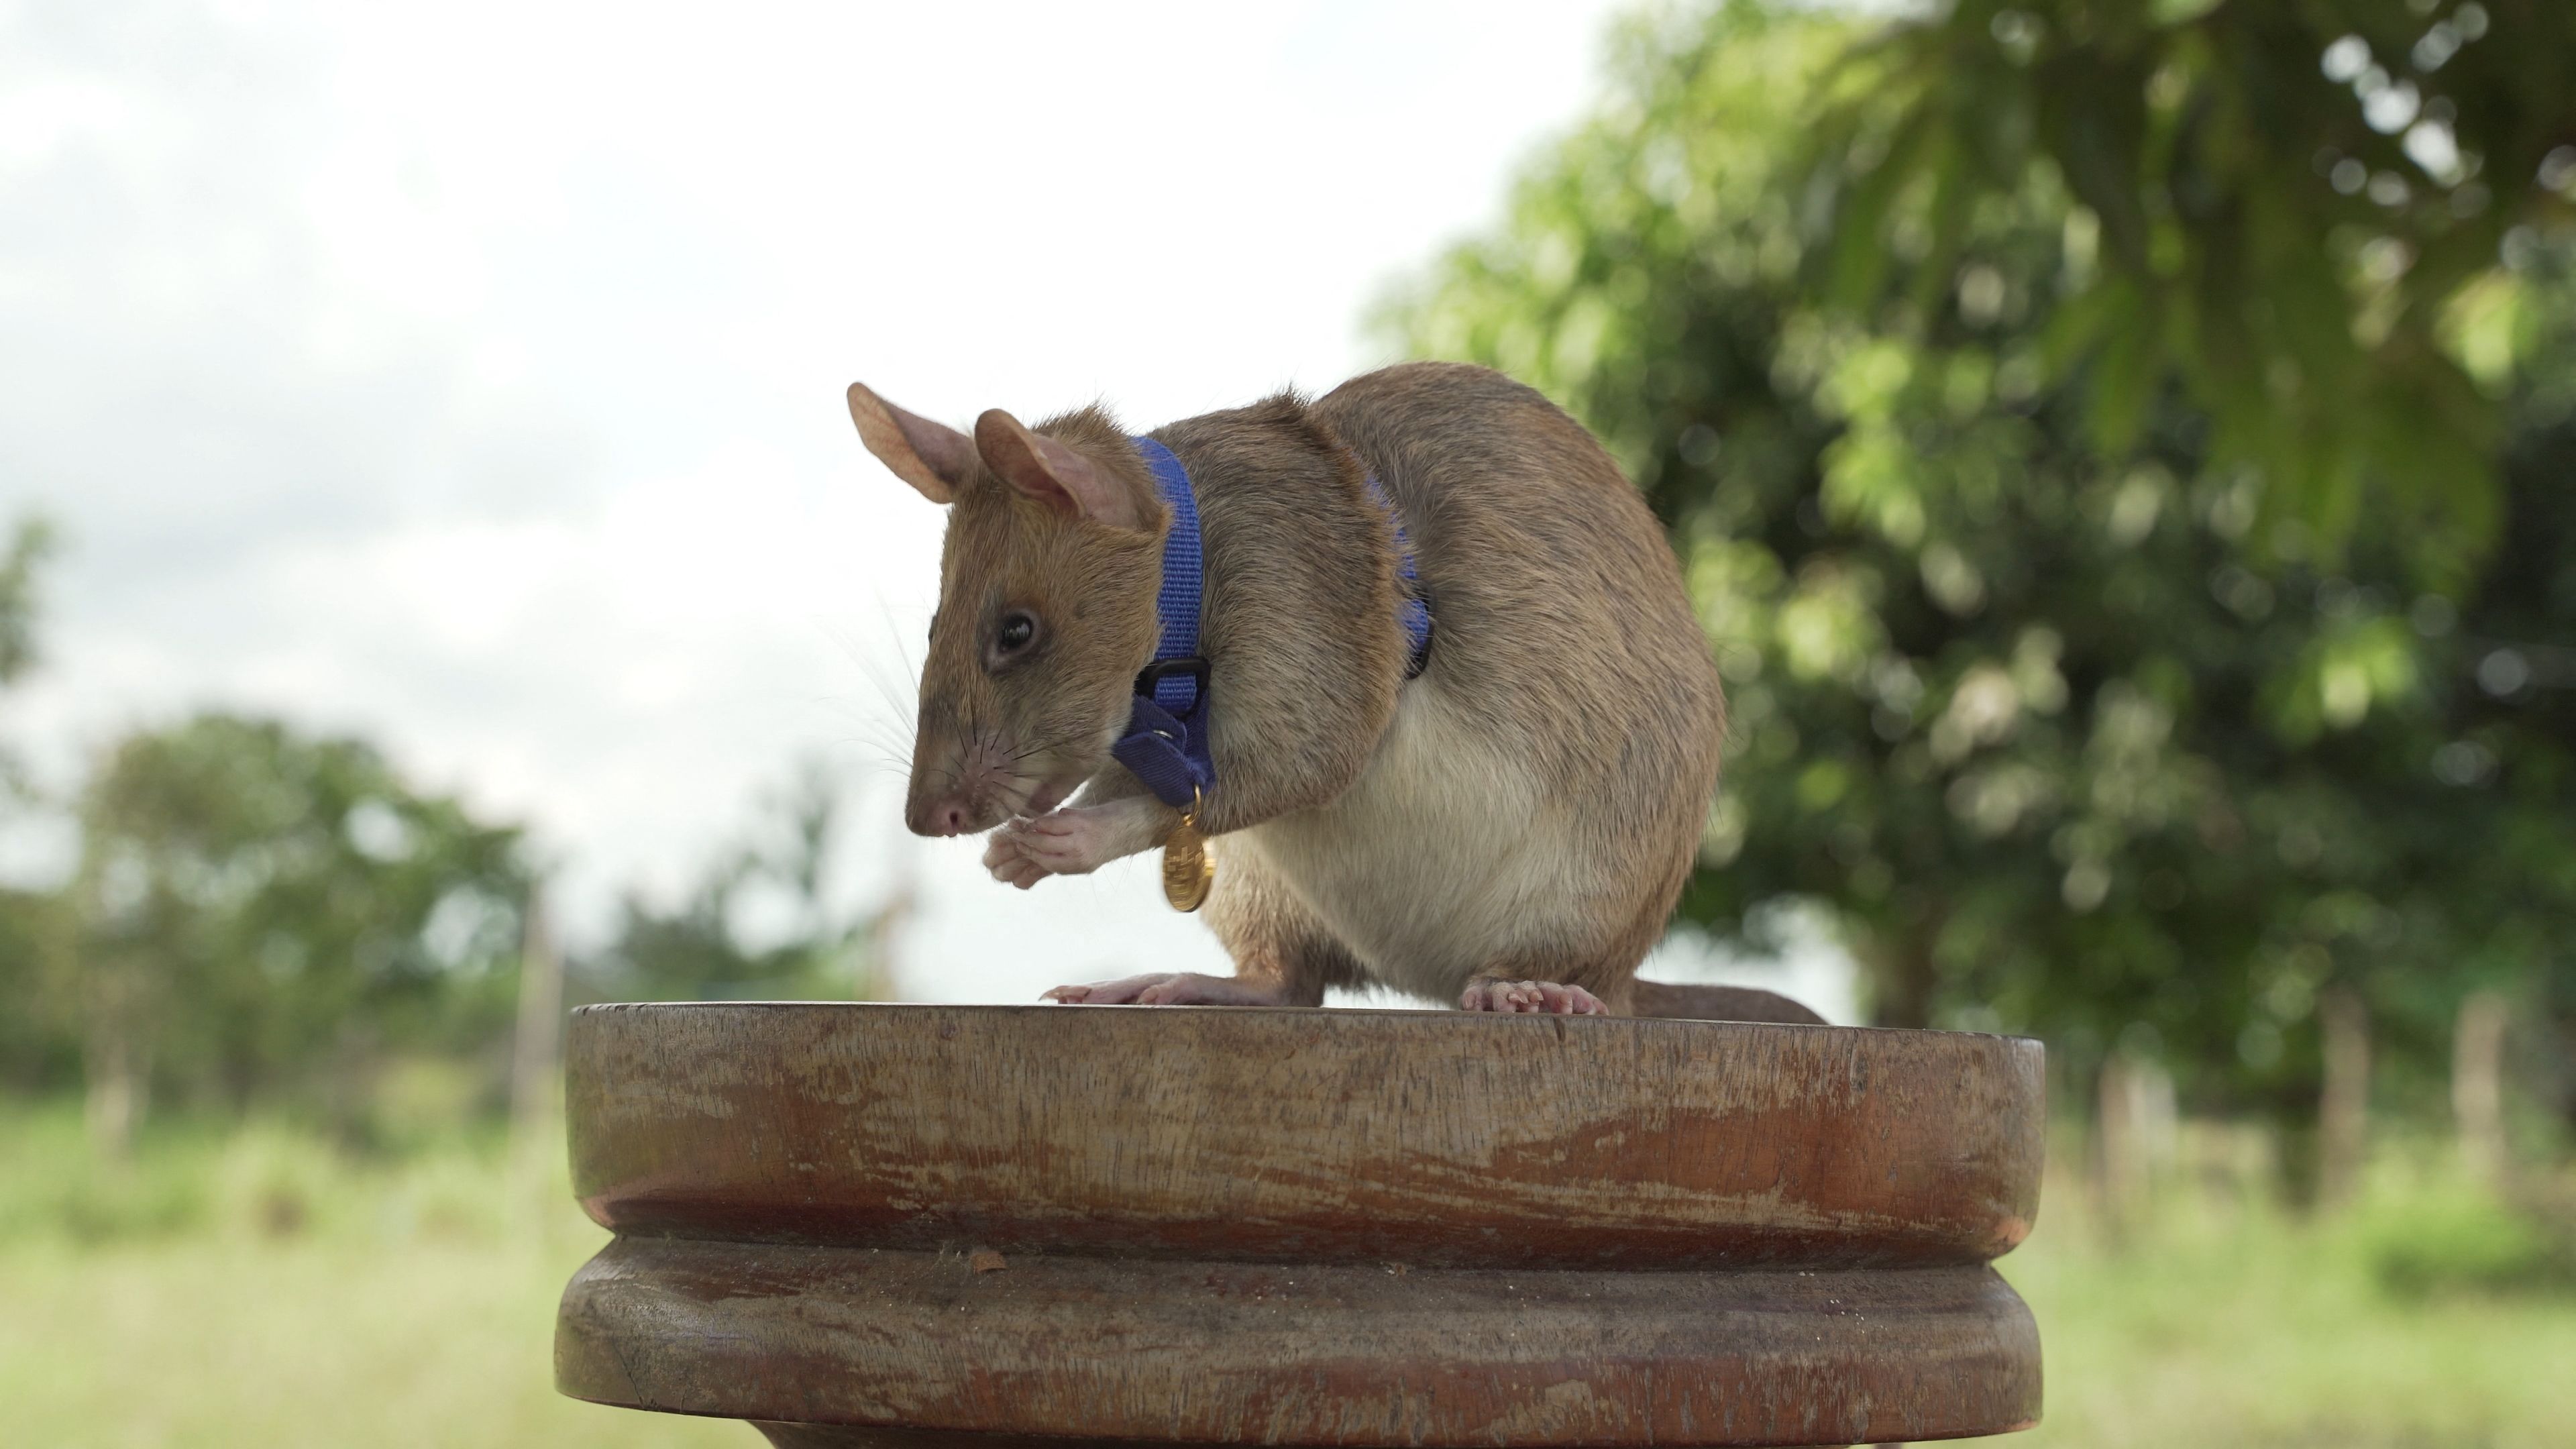 (FILES) This file undated handout photo released by UK veterinary charity PDSA on September 25, 2020 shows Magawa, an African giant pouched rat, wearing his gold medal received from PDSA for his work in detecting landmines, in Siem Reap. - A giant African pouched rat called Magawa who spent years detecting landmines in the Cambodian countryside has stopped working and will enjoy a well-earned retirement eating bananas and peanuts, his employers told AFP on June 5, 2021. (Photo by Handout / PDSA / AFP) / RESTRICTED TO EDITORIAL USE - MANDATORY CREDIT "AFP PHOTO /PDSA " - NO MARKETING - NO ADVERTISING CAMPAIGNS - DISTRIBUTED AS A SERVICE TO CLIENTS